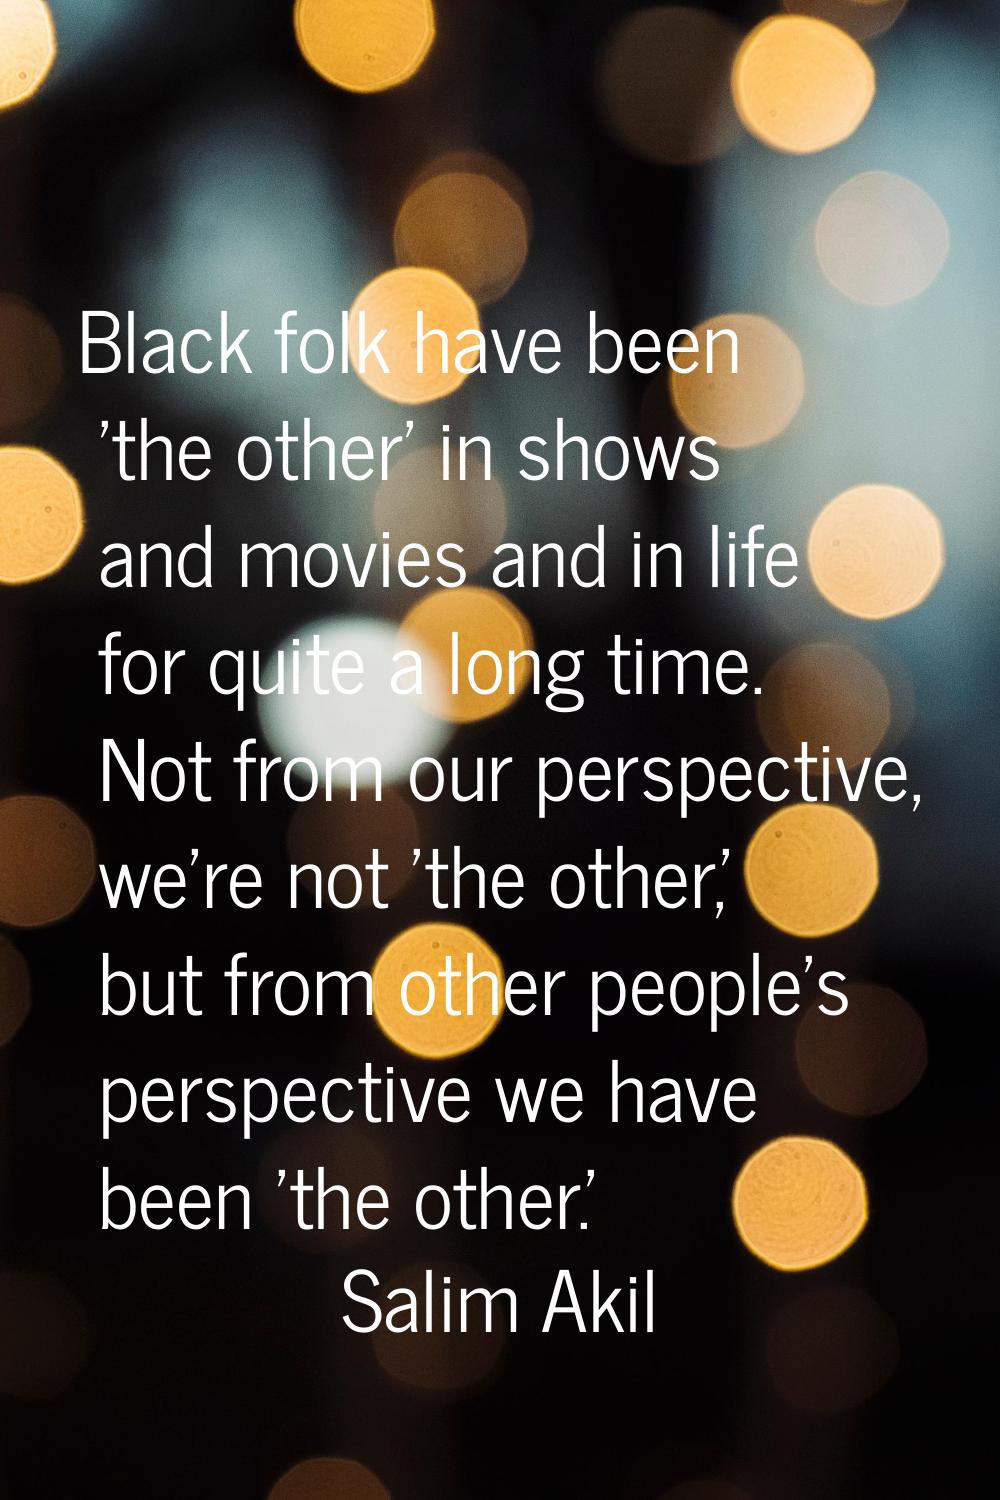 Black folk have been 'the other' in shows and movies and in life for quite a long time. Not from ou